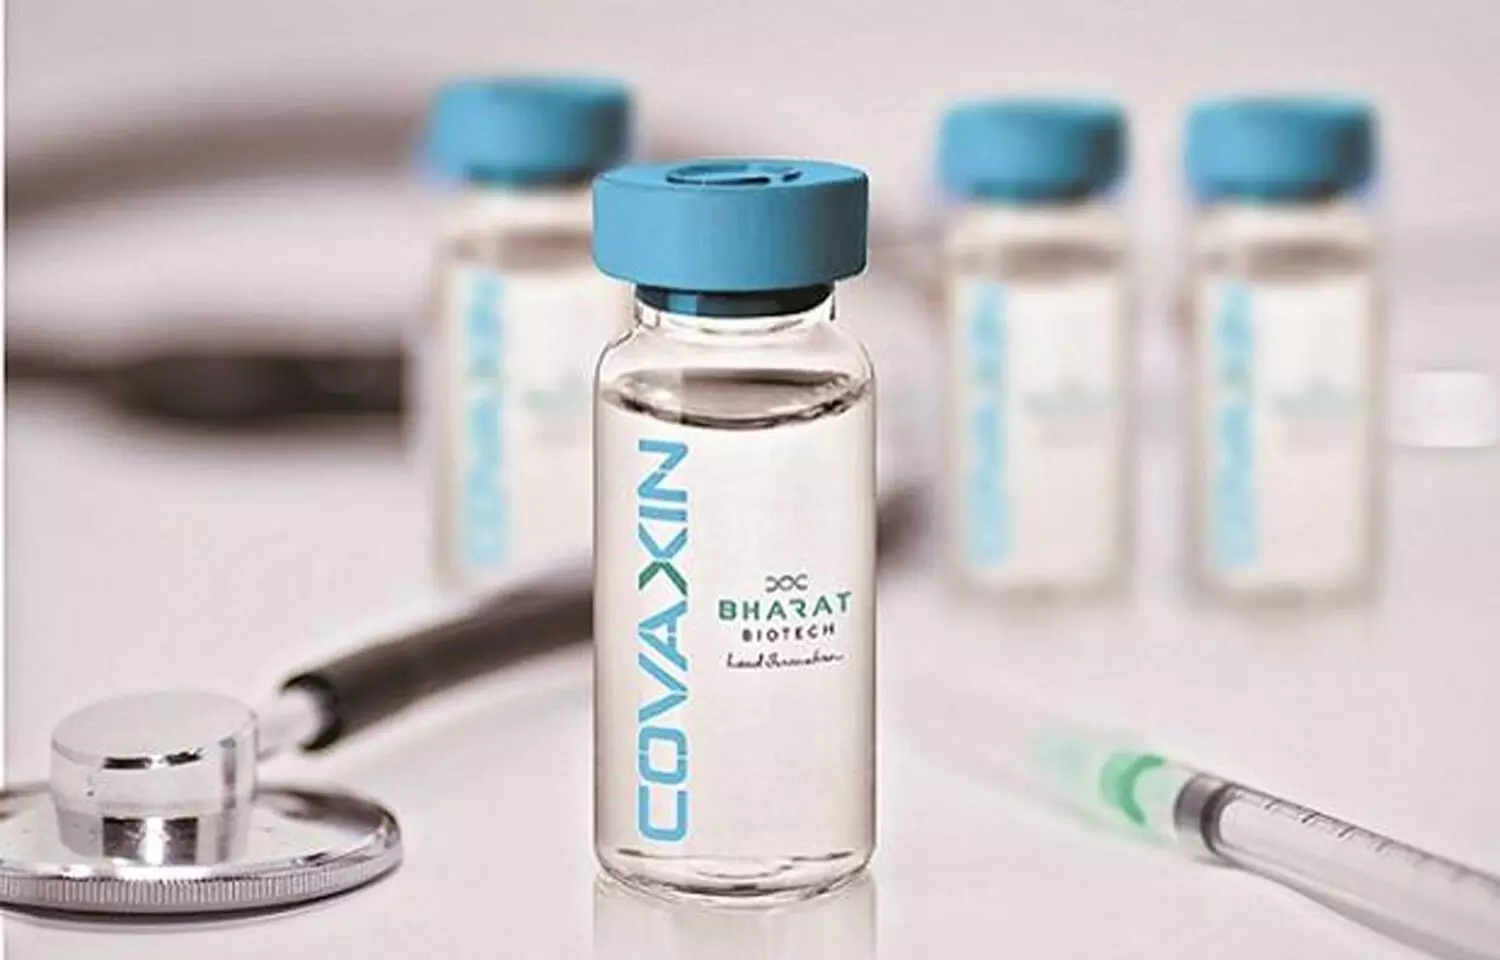 Bharat Biotech Covaxin  likely to get WHO emergency use nod by October 5